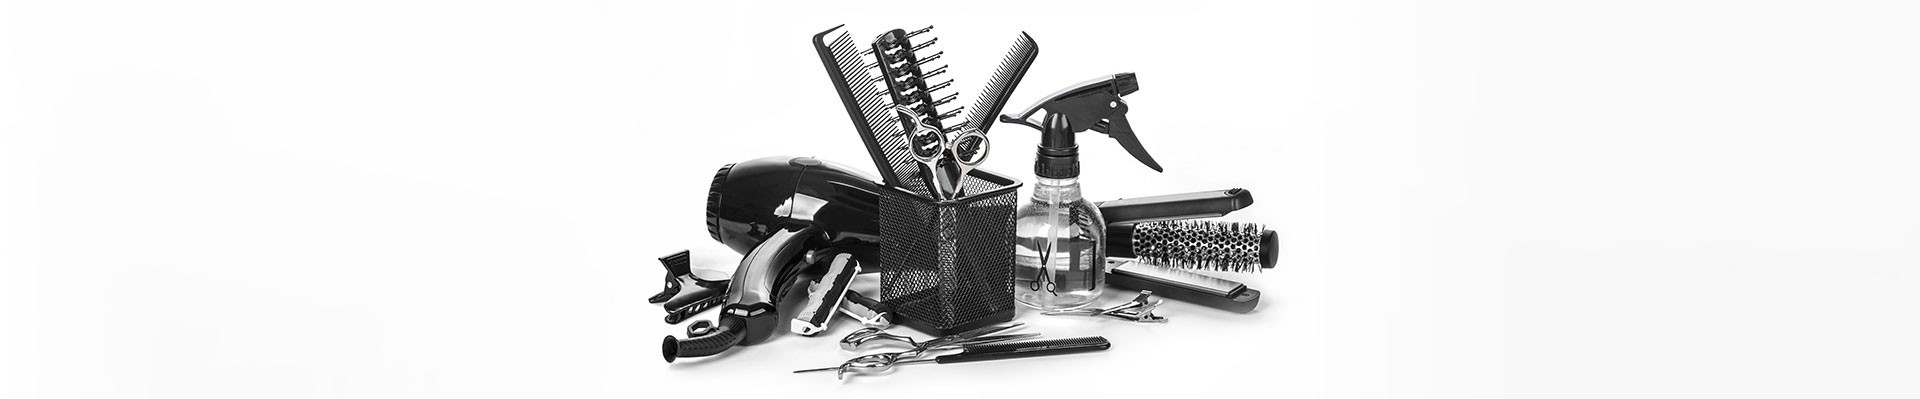 Hairdresser 's tools